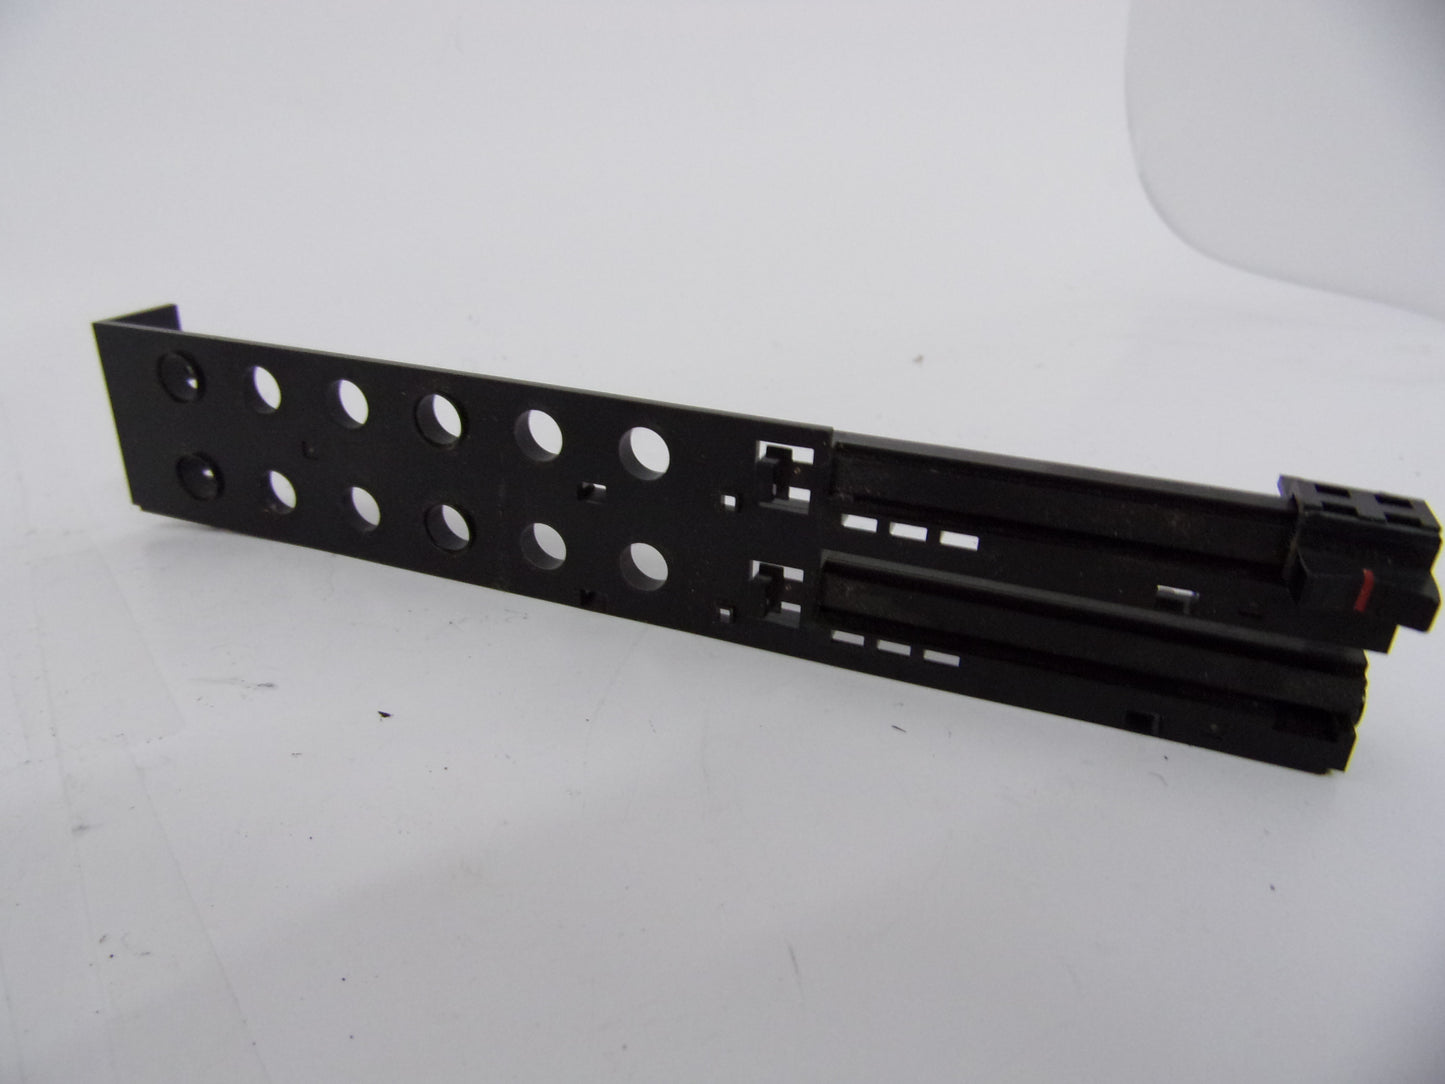 Plastic sub Plate for the MM-1 Mixer